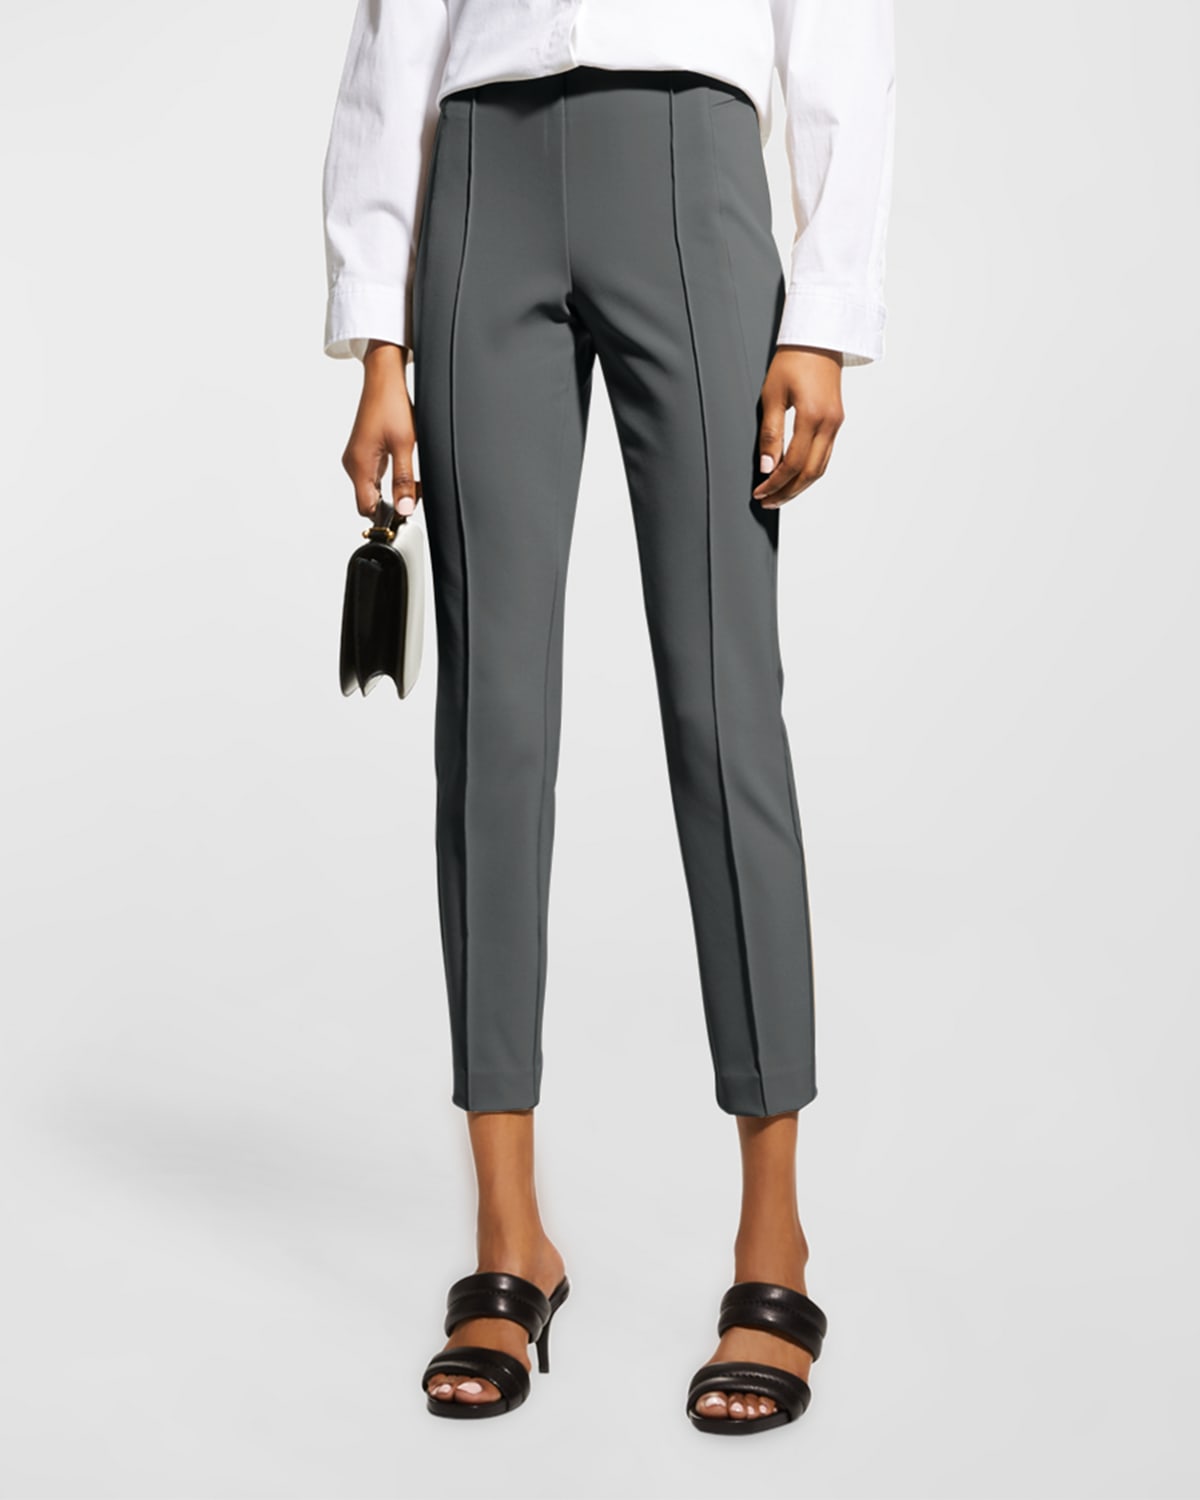 Lafayette 148 Petite Gramercy Acclaimed Stretch Trousers In Shale